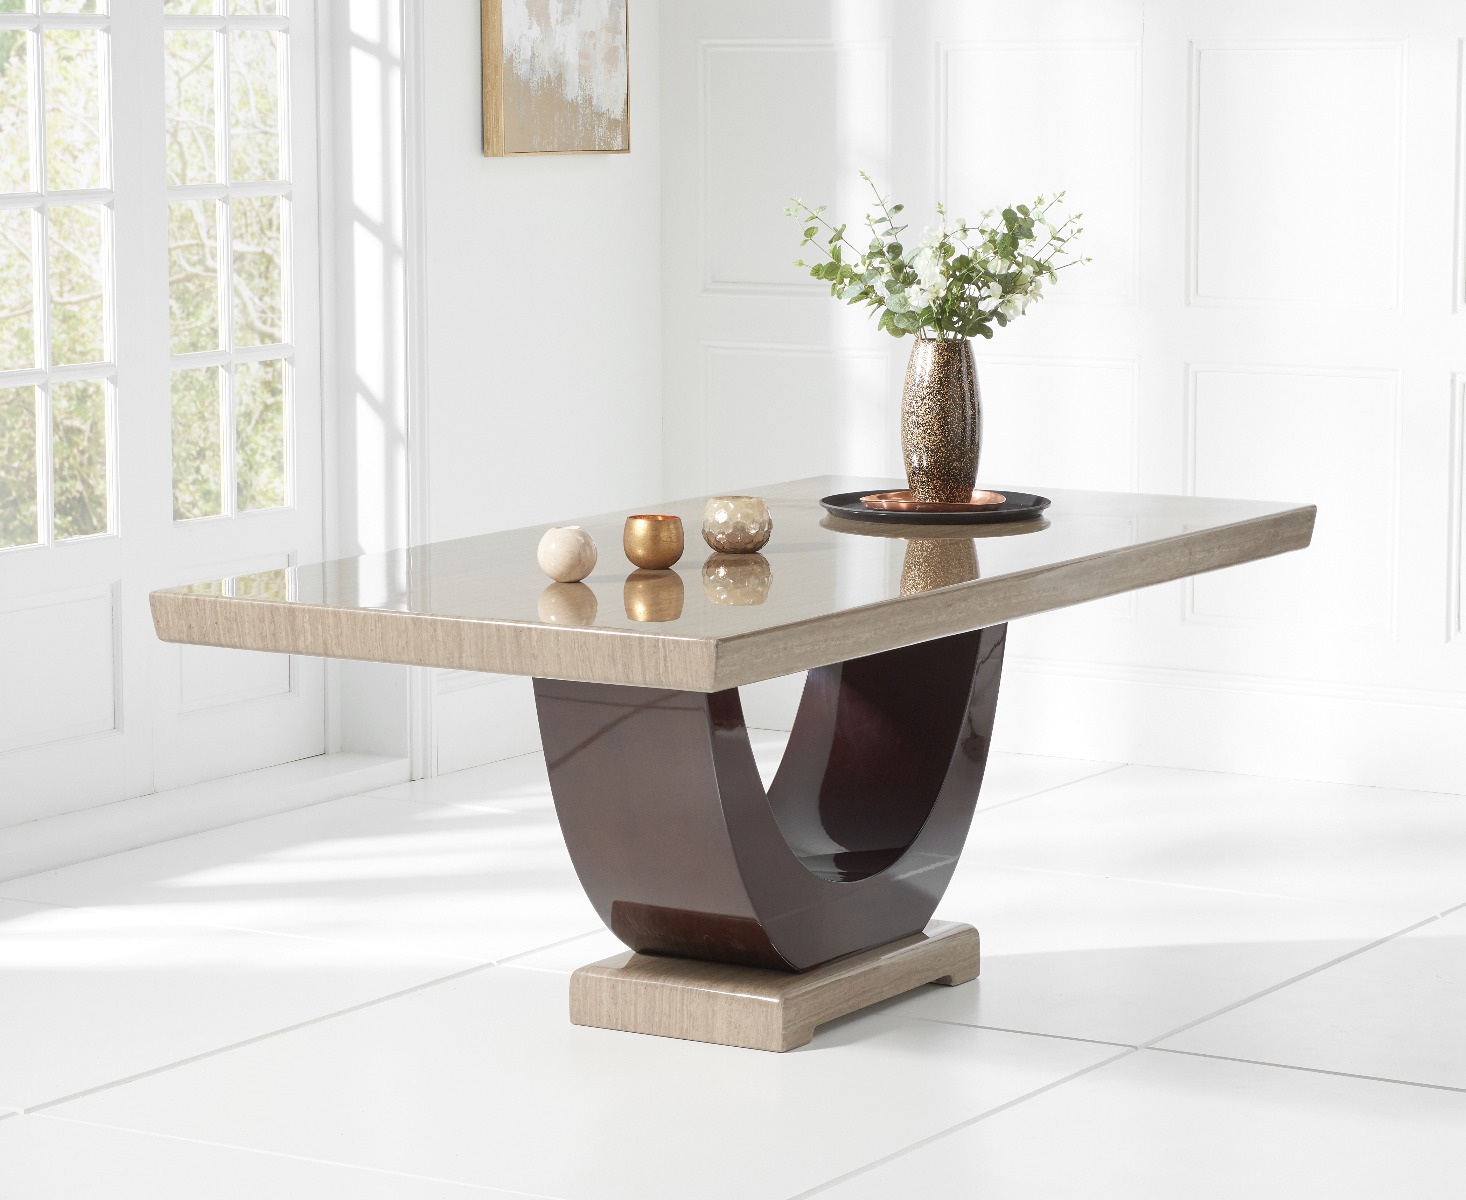 Photo 1 of Novara 170cm brown pedestal marble dining table with 4 brown alpine chairs